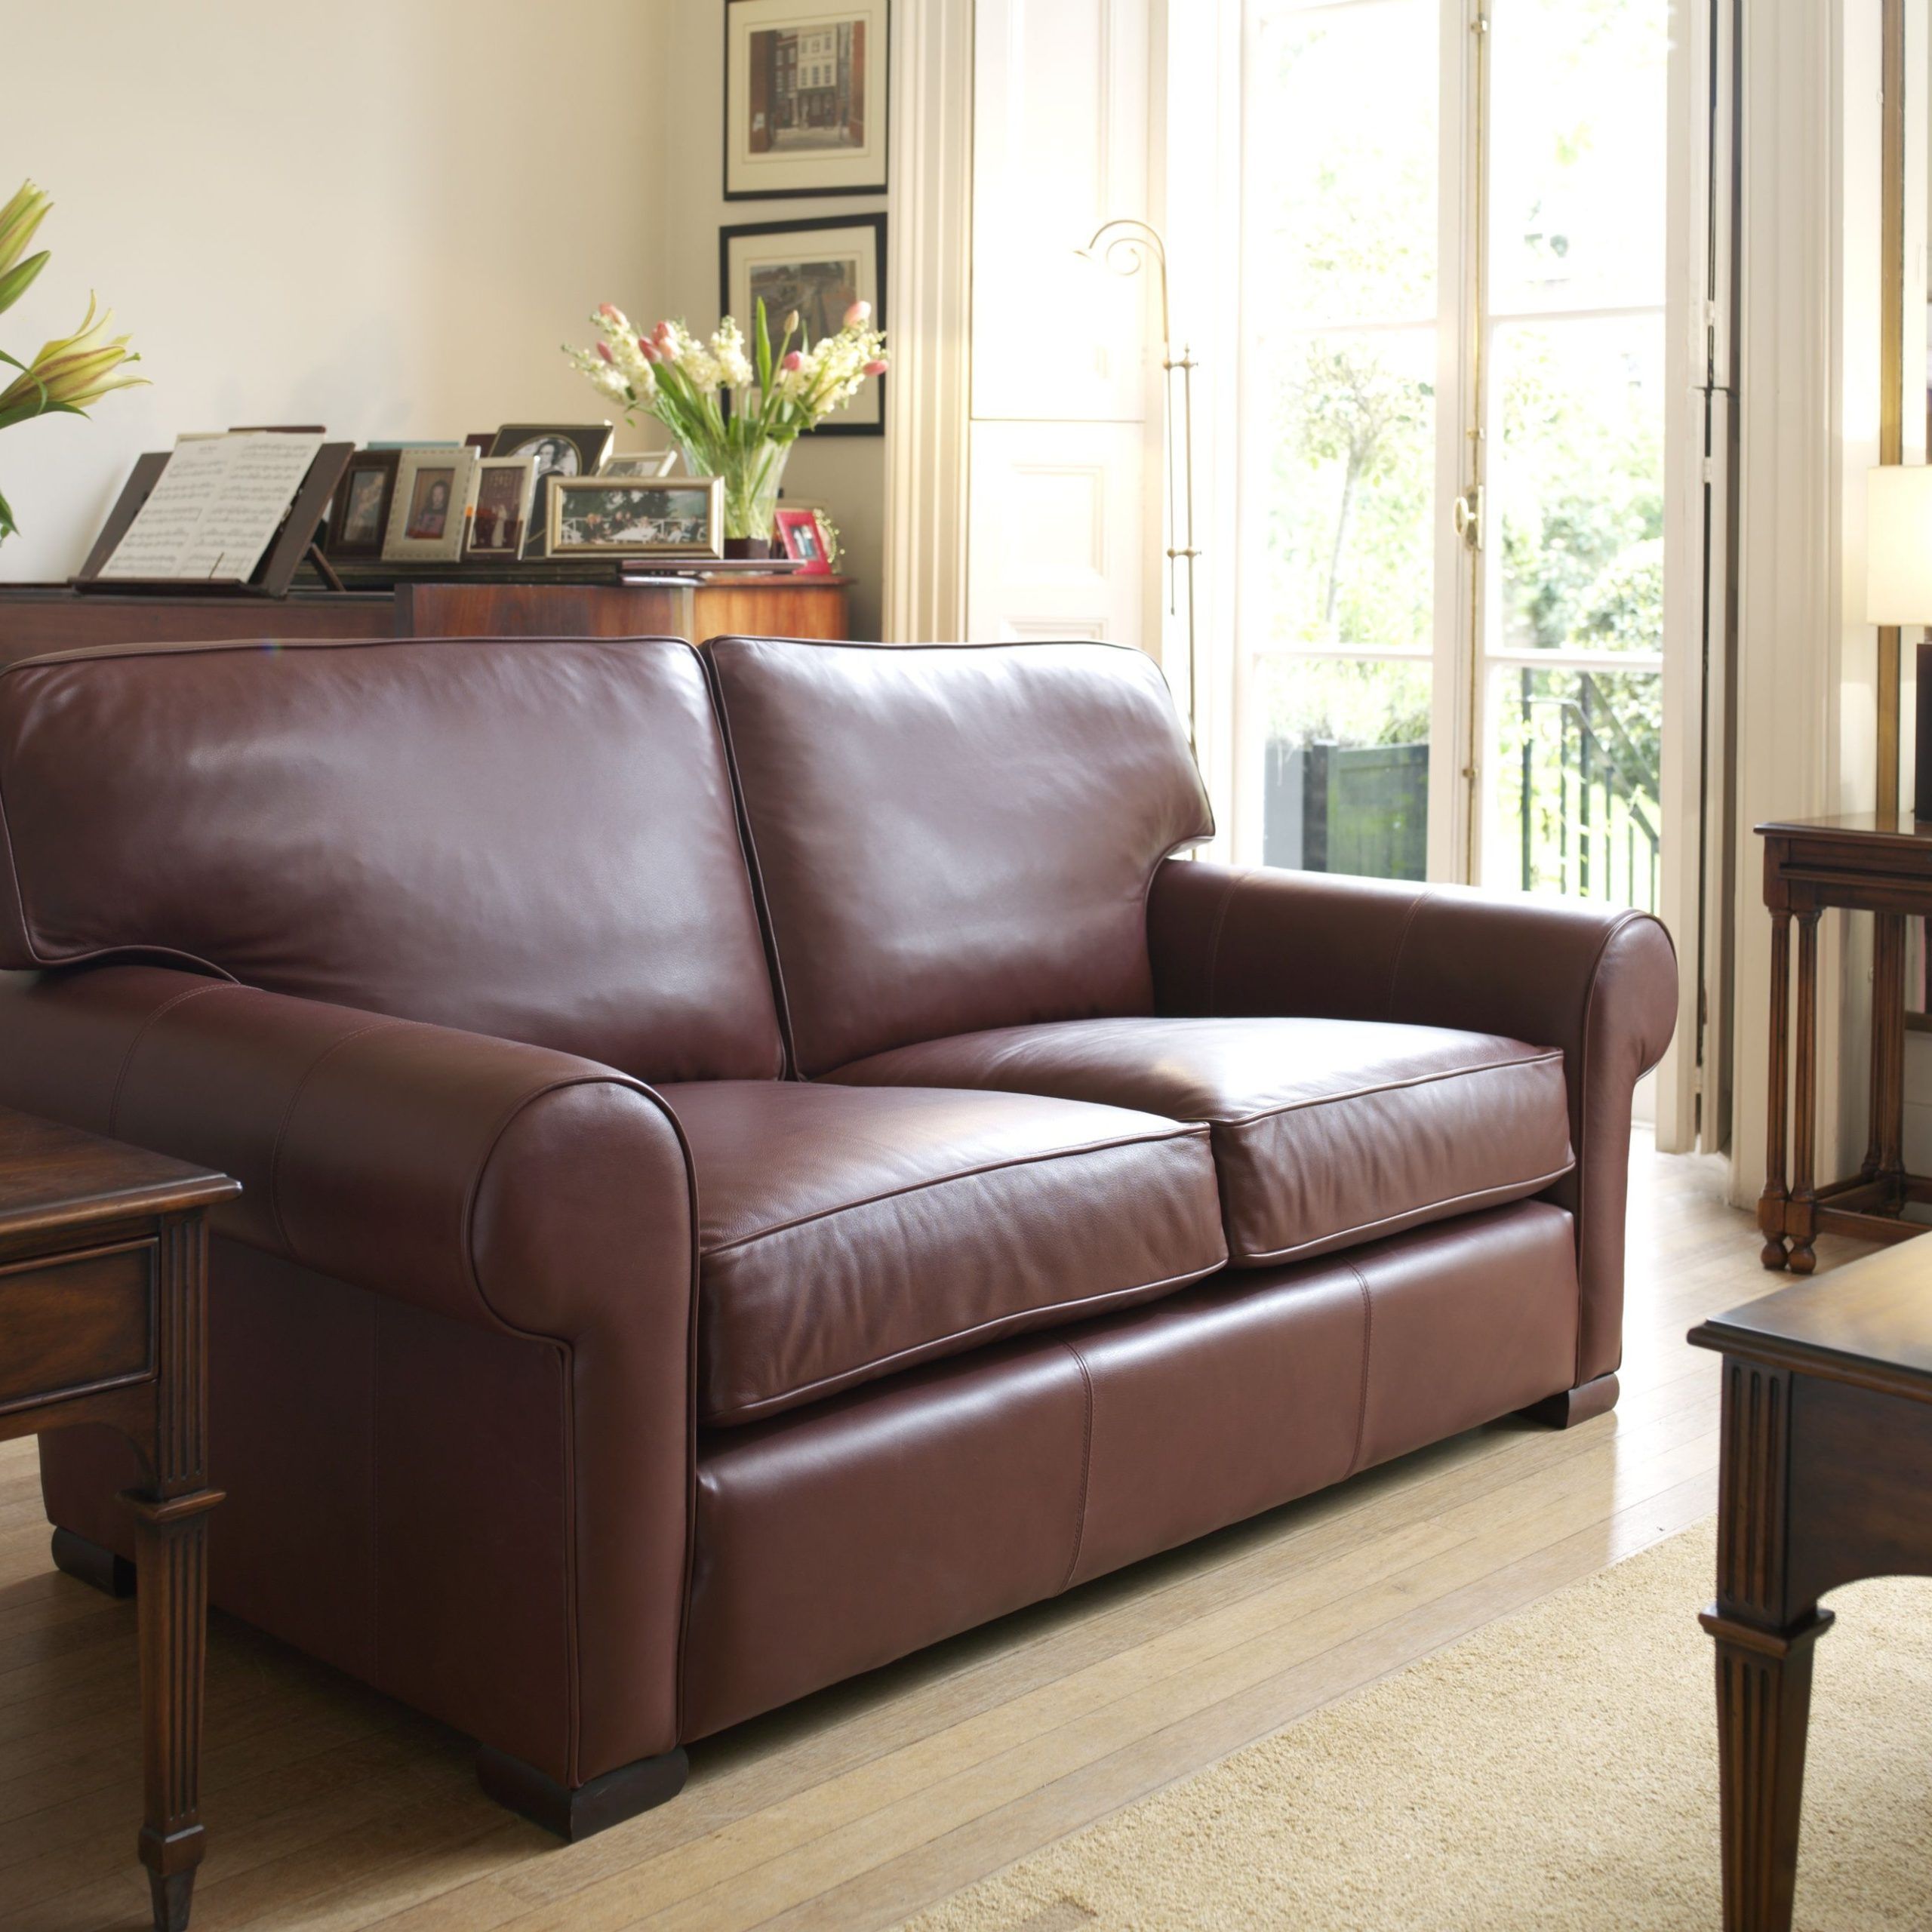 Our Best Selling Imogen Range Is Also Available In Leather. | Leather  Furniture, Leather Sofa Bed, Furniture Throughout Multiyork Leather Sofas (Photo 1 of 10)